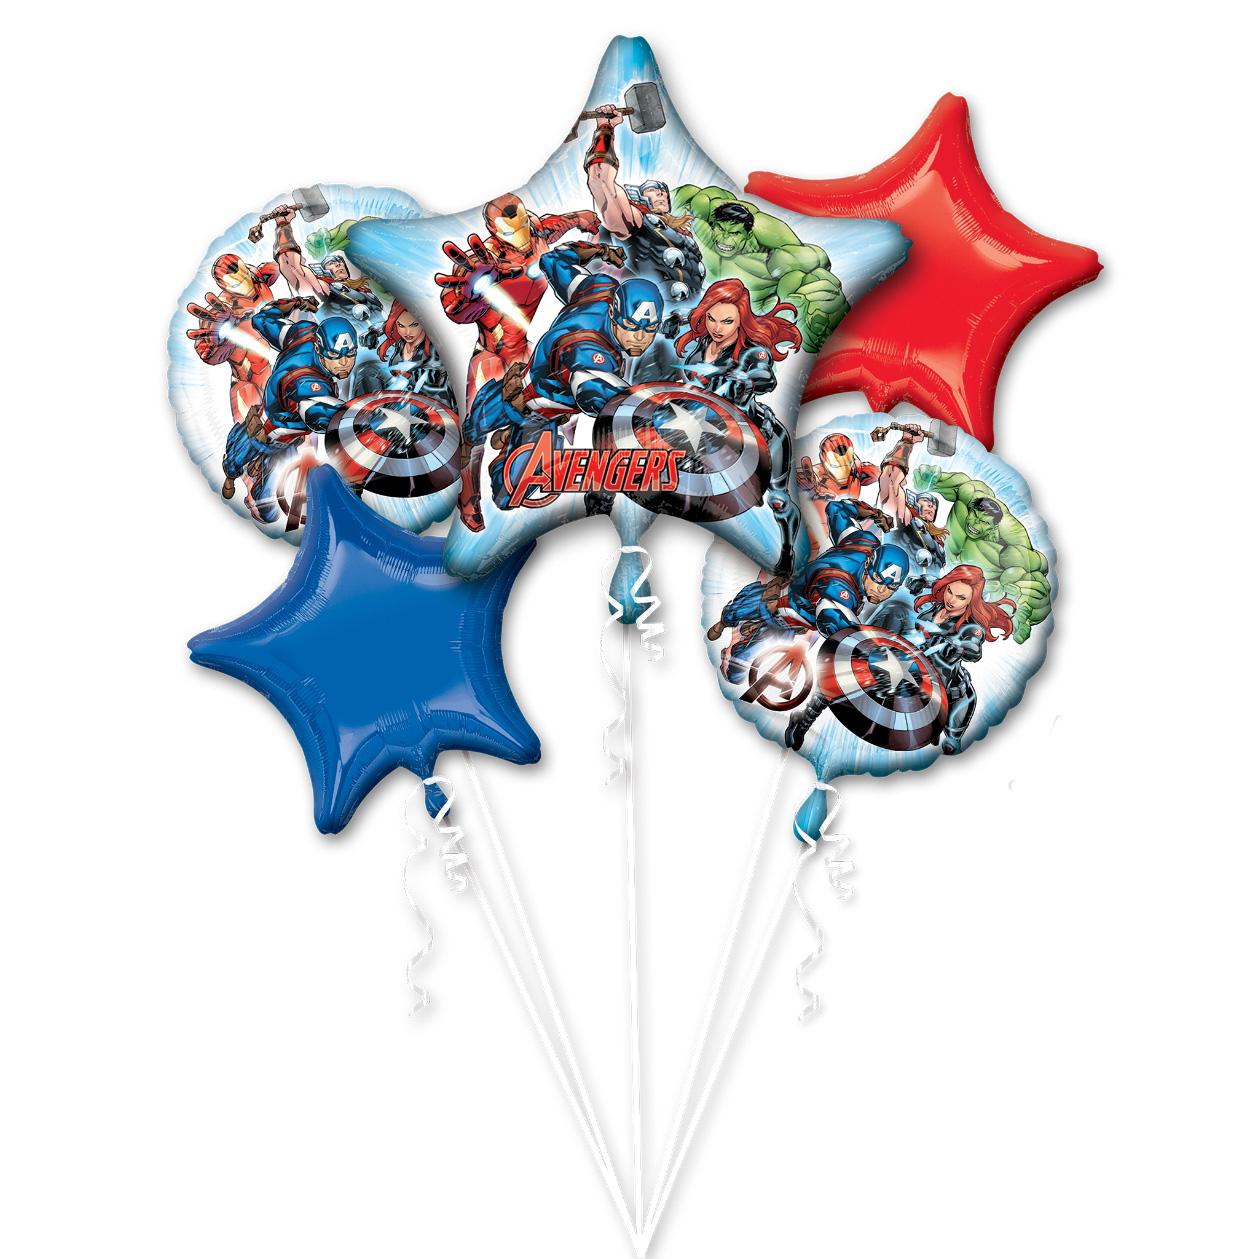 Avengers Animated Balloon Bouquet 5pcs Balloons & Streamers - Party Centre - Party Centre